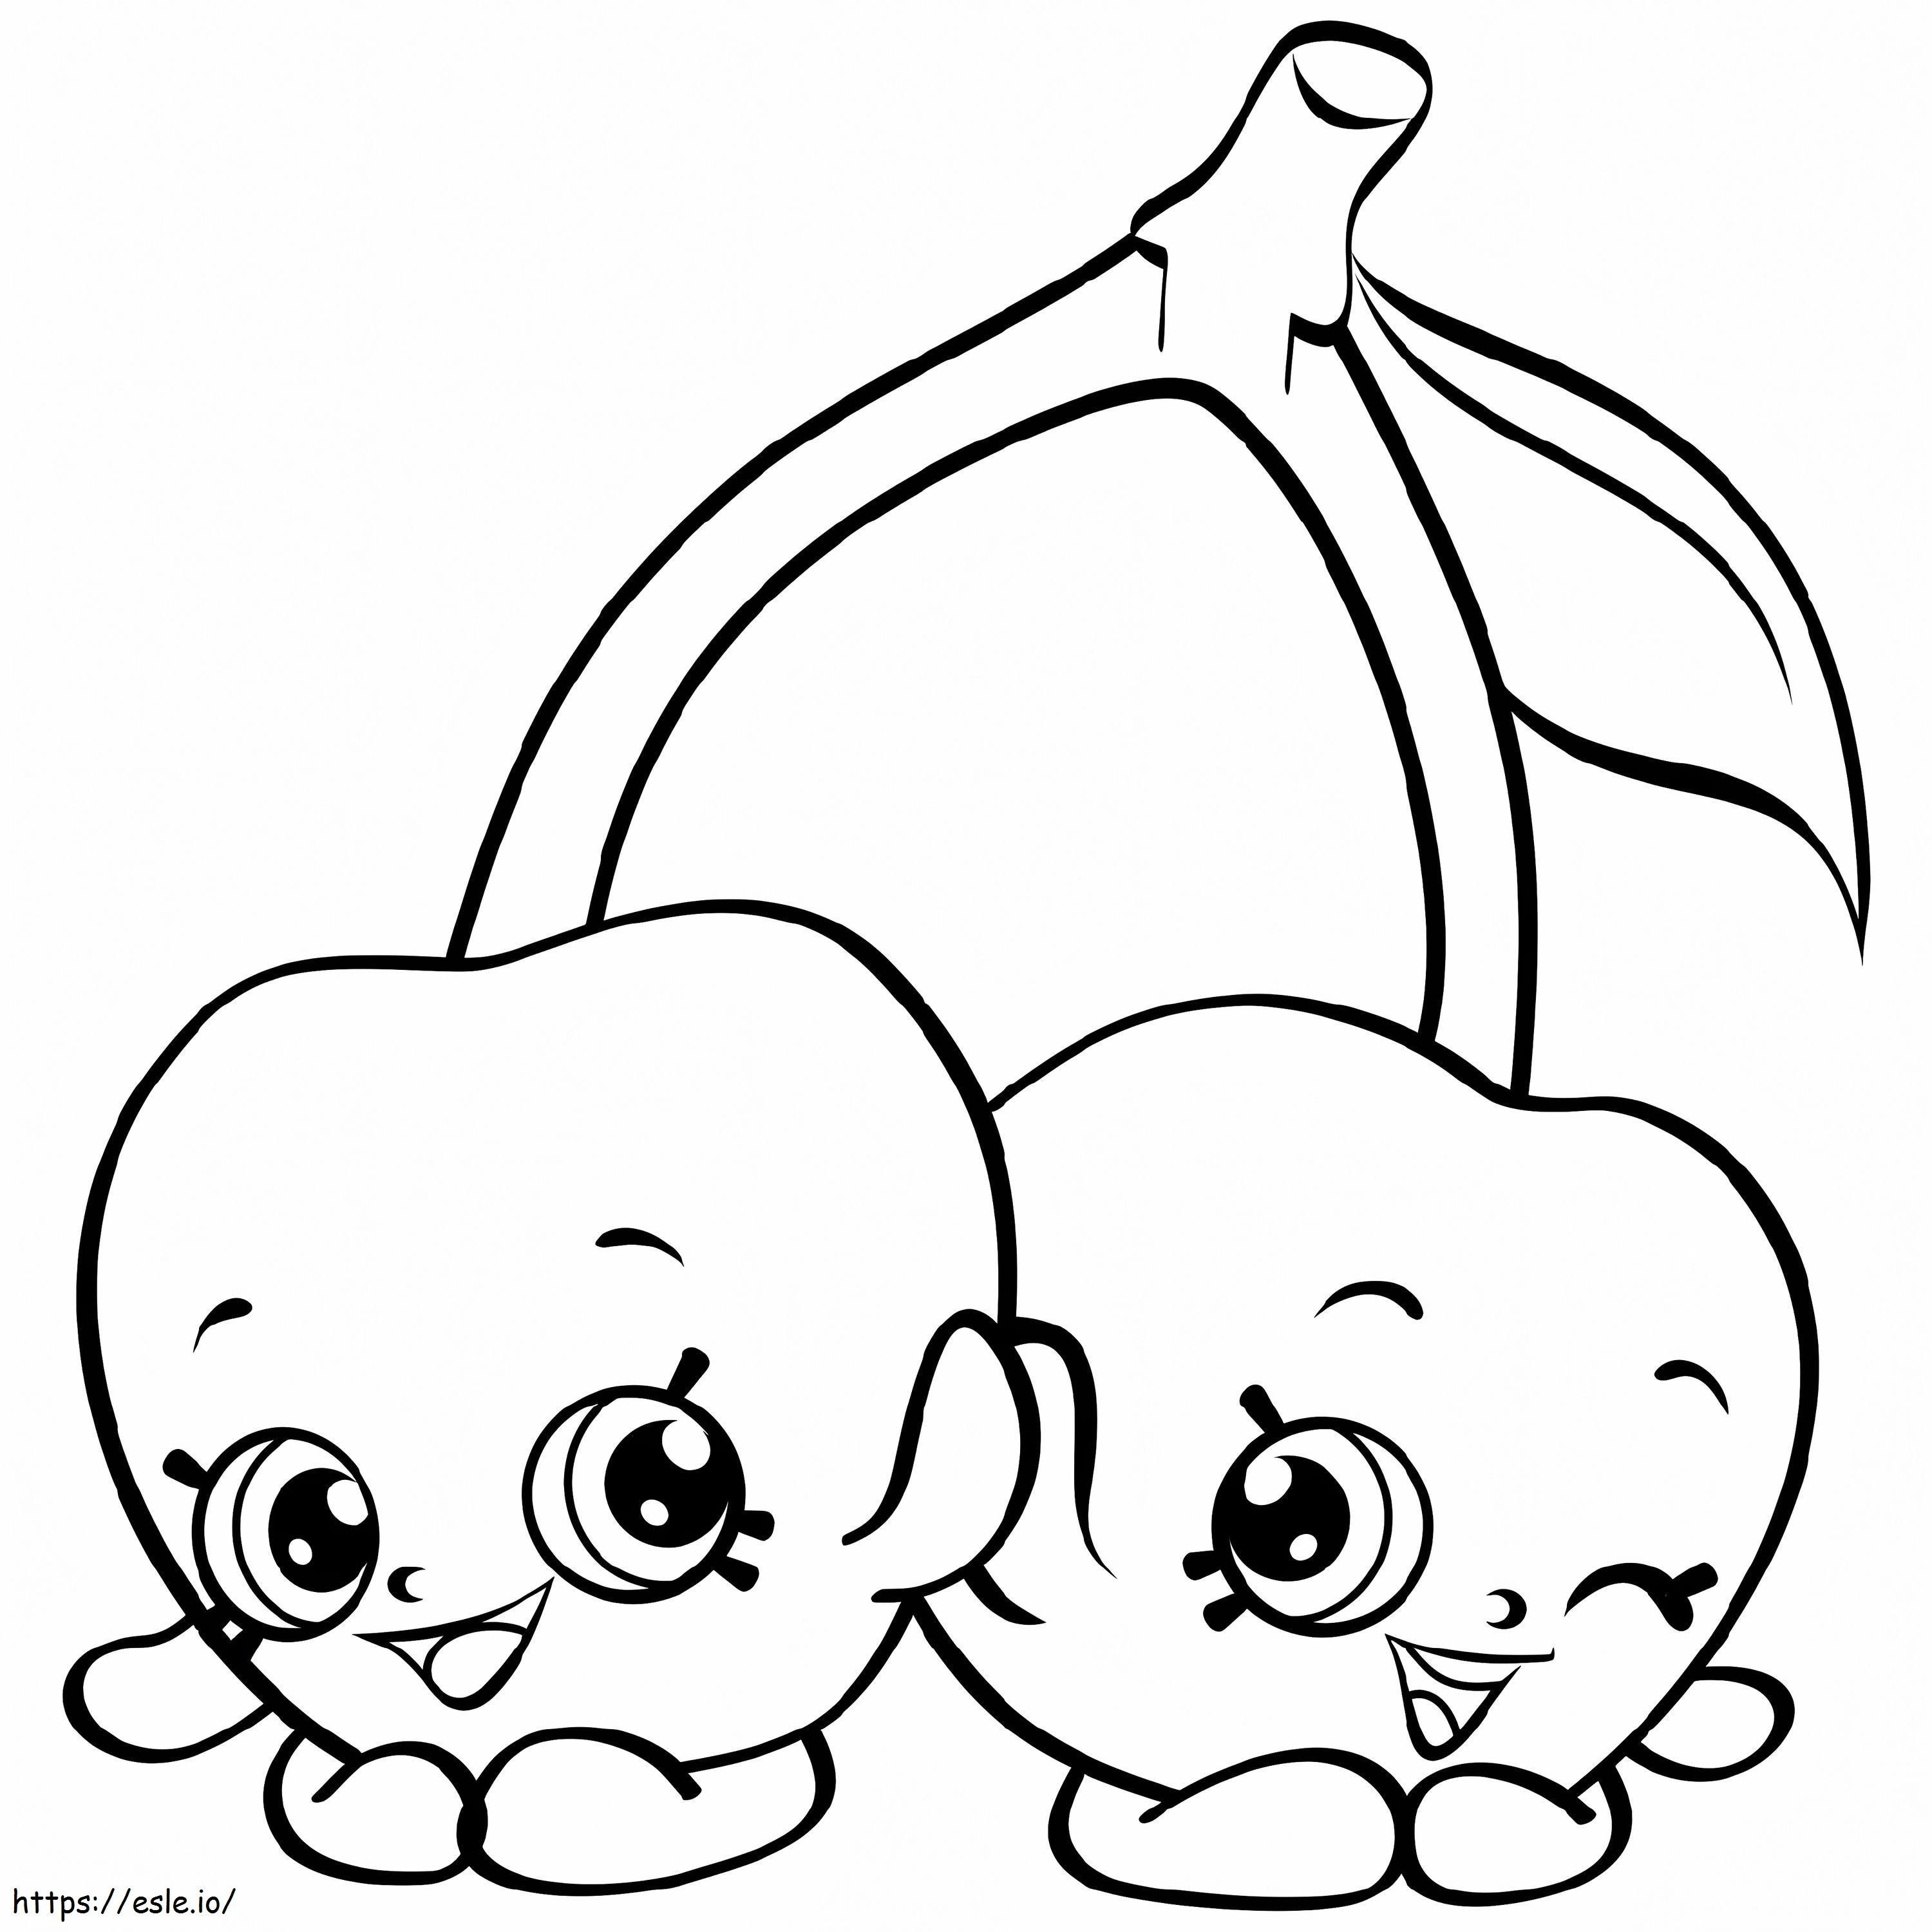 Cheeky Cherries Shopkin coloring page